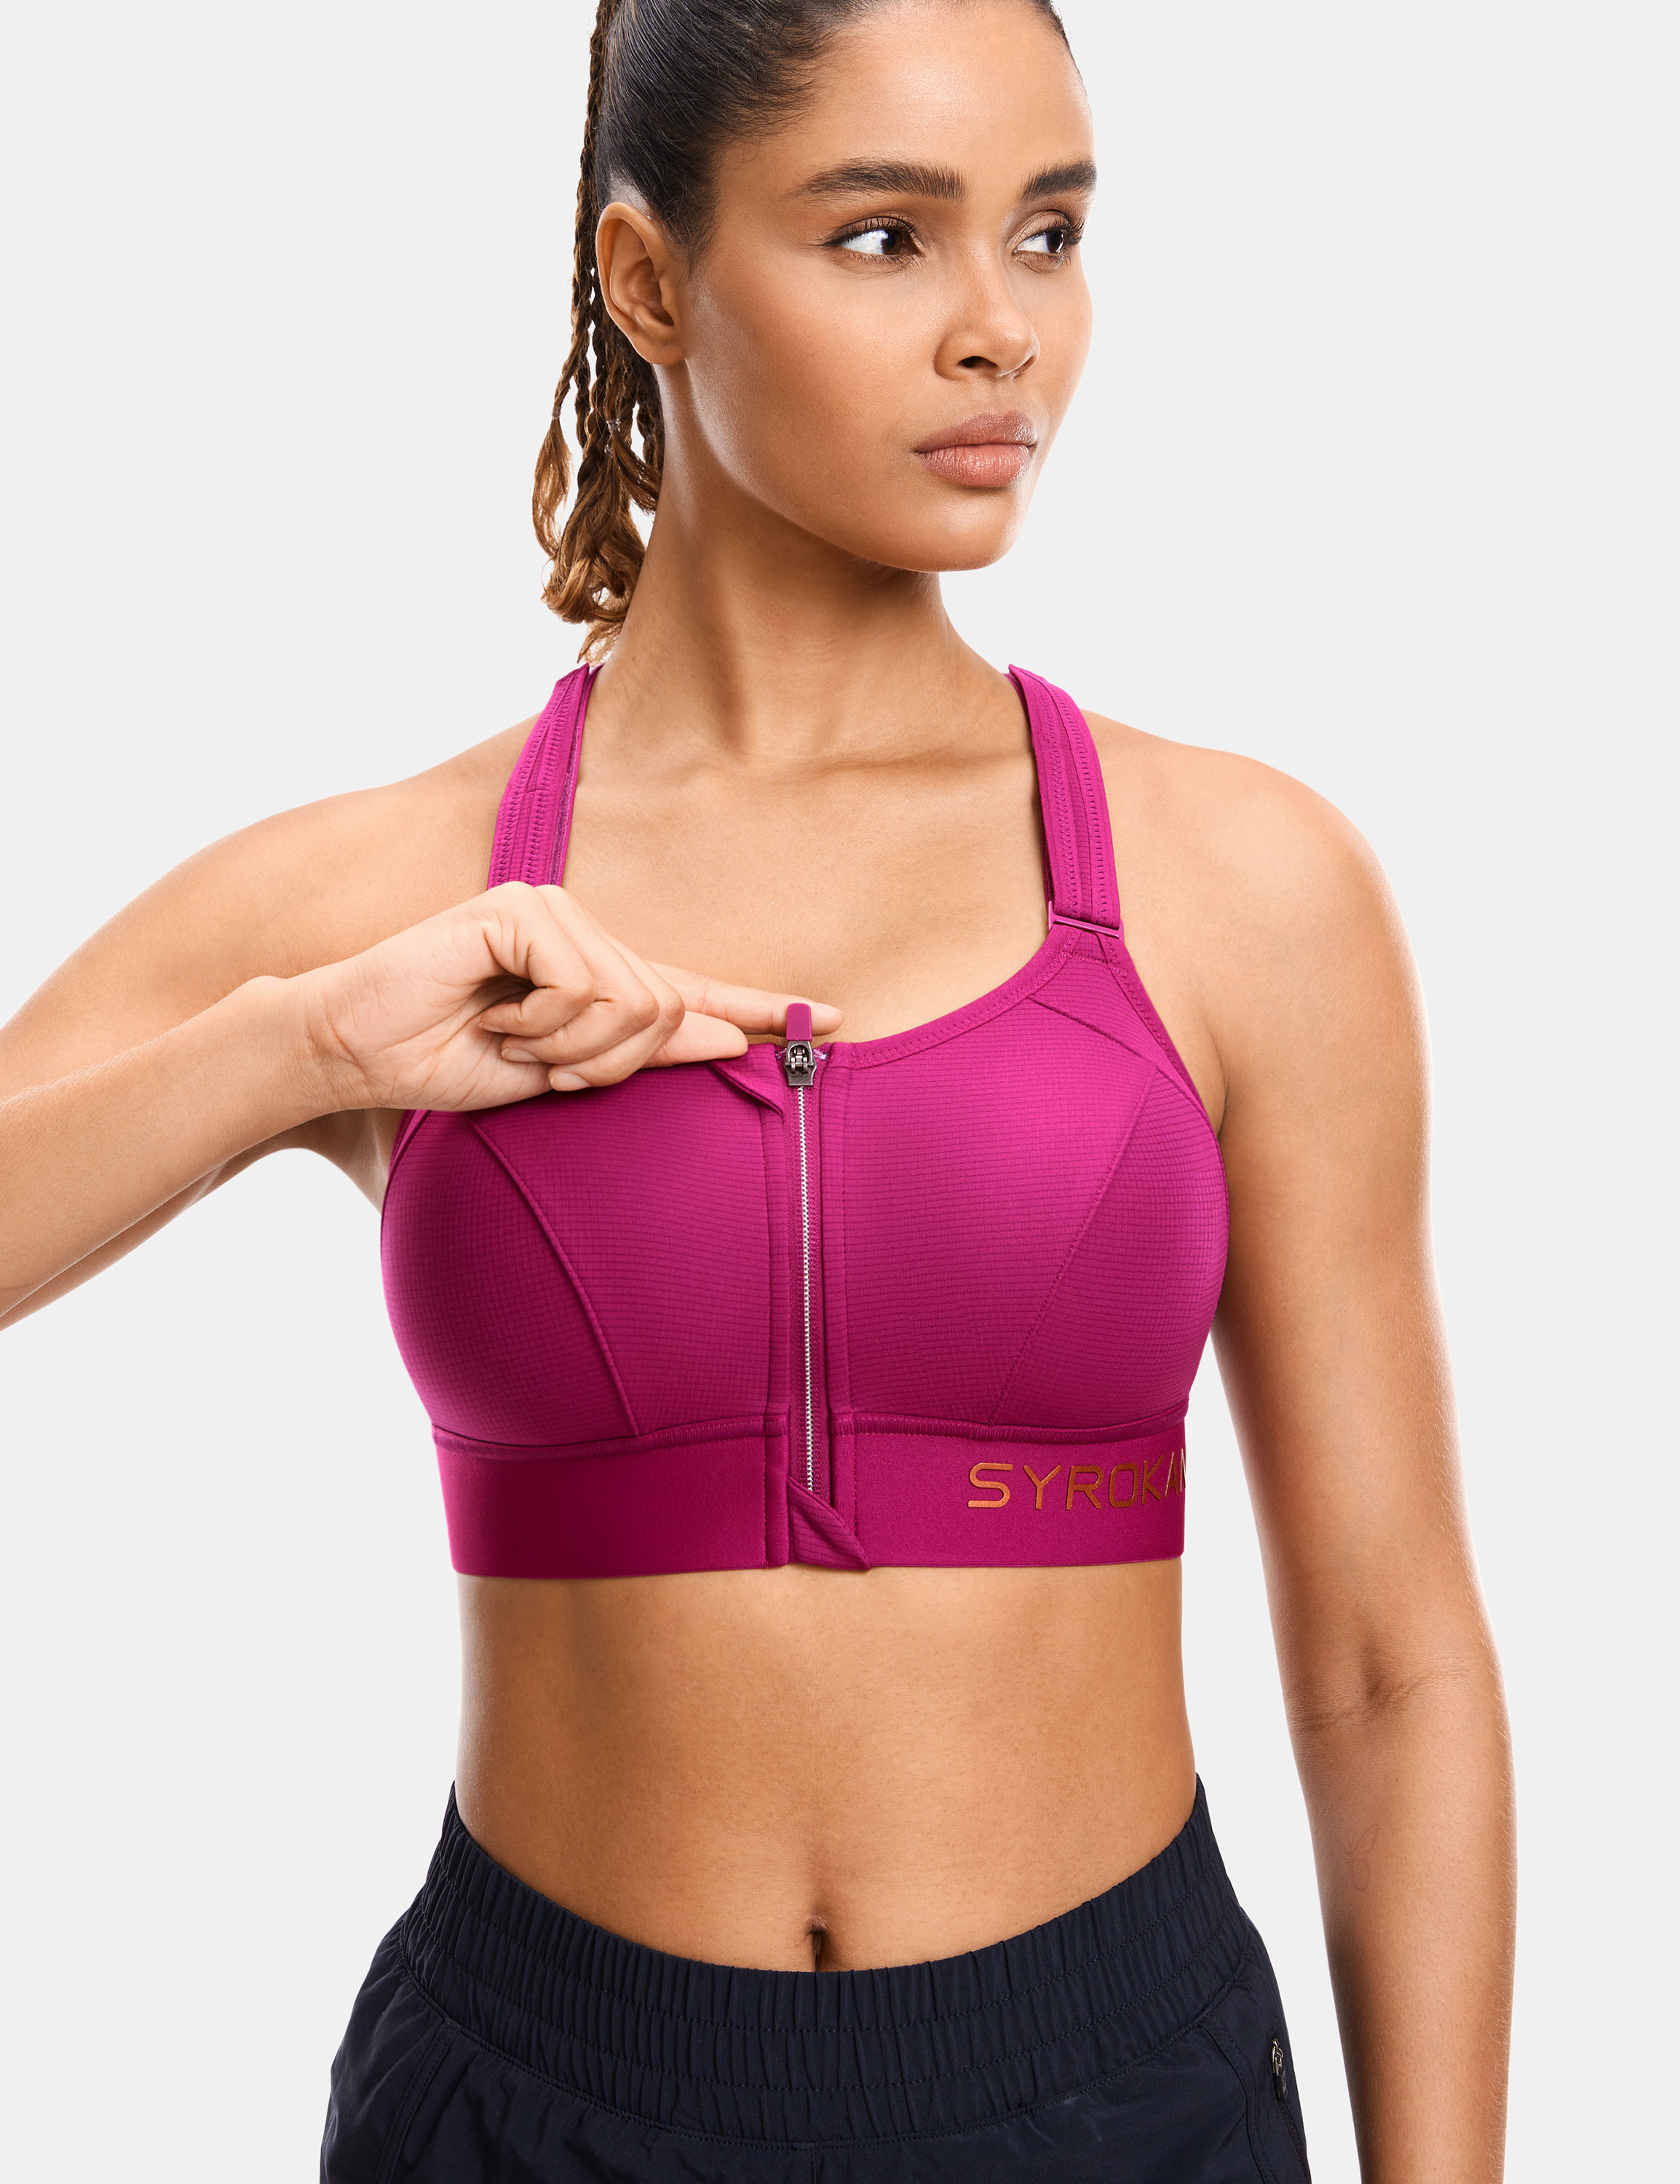 Ogiraw Sports Bras for Large Busted Women Silk Sports 2PC Latex